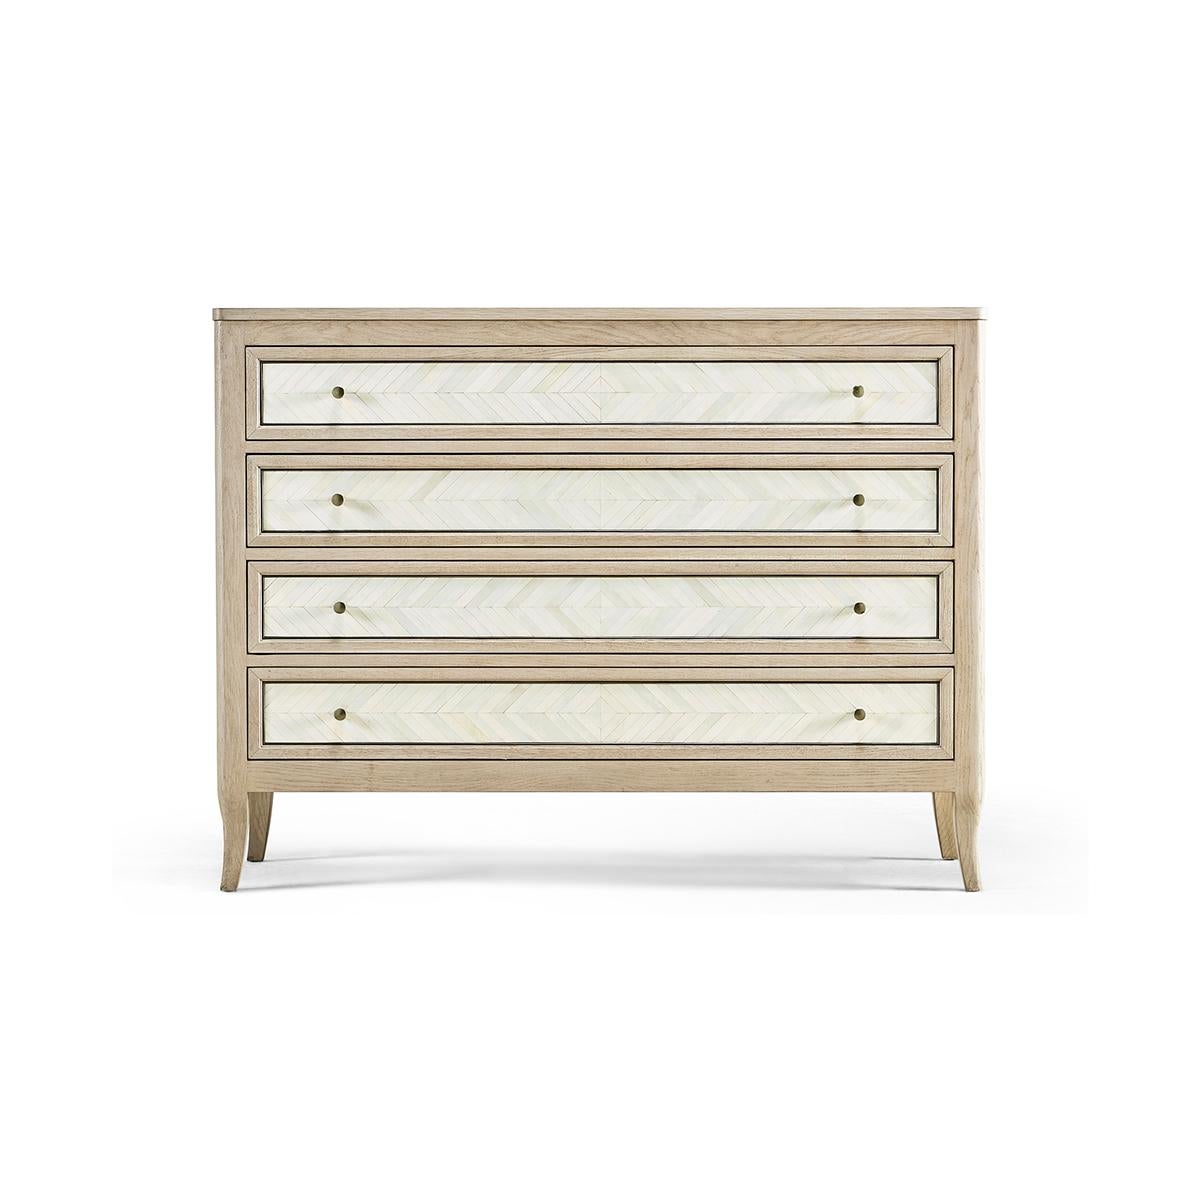 A luxurious addition to your home decor that exudes quality, design, and function. Expertly crafted by furniture artisans, this dresser is a testament to their skilled craftsmanship and attention to detail.

Featuring chevron bone inlay drawer